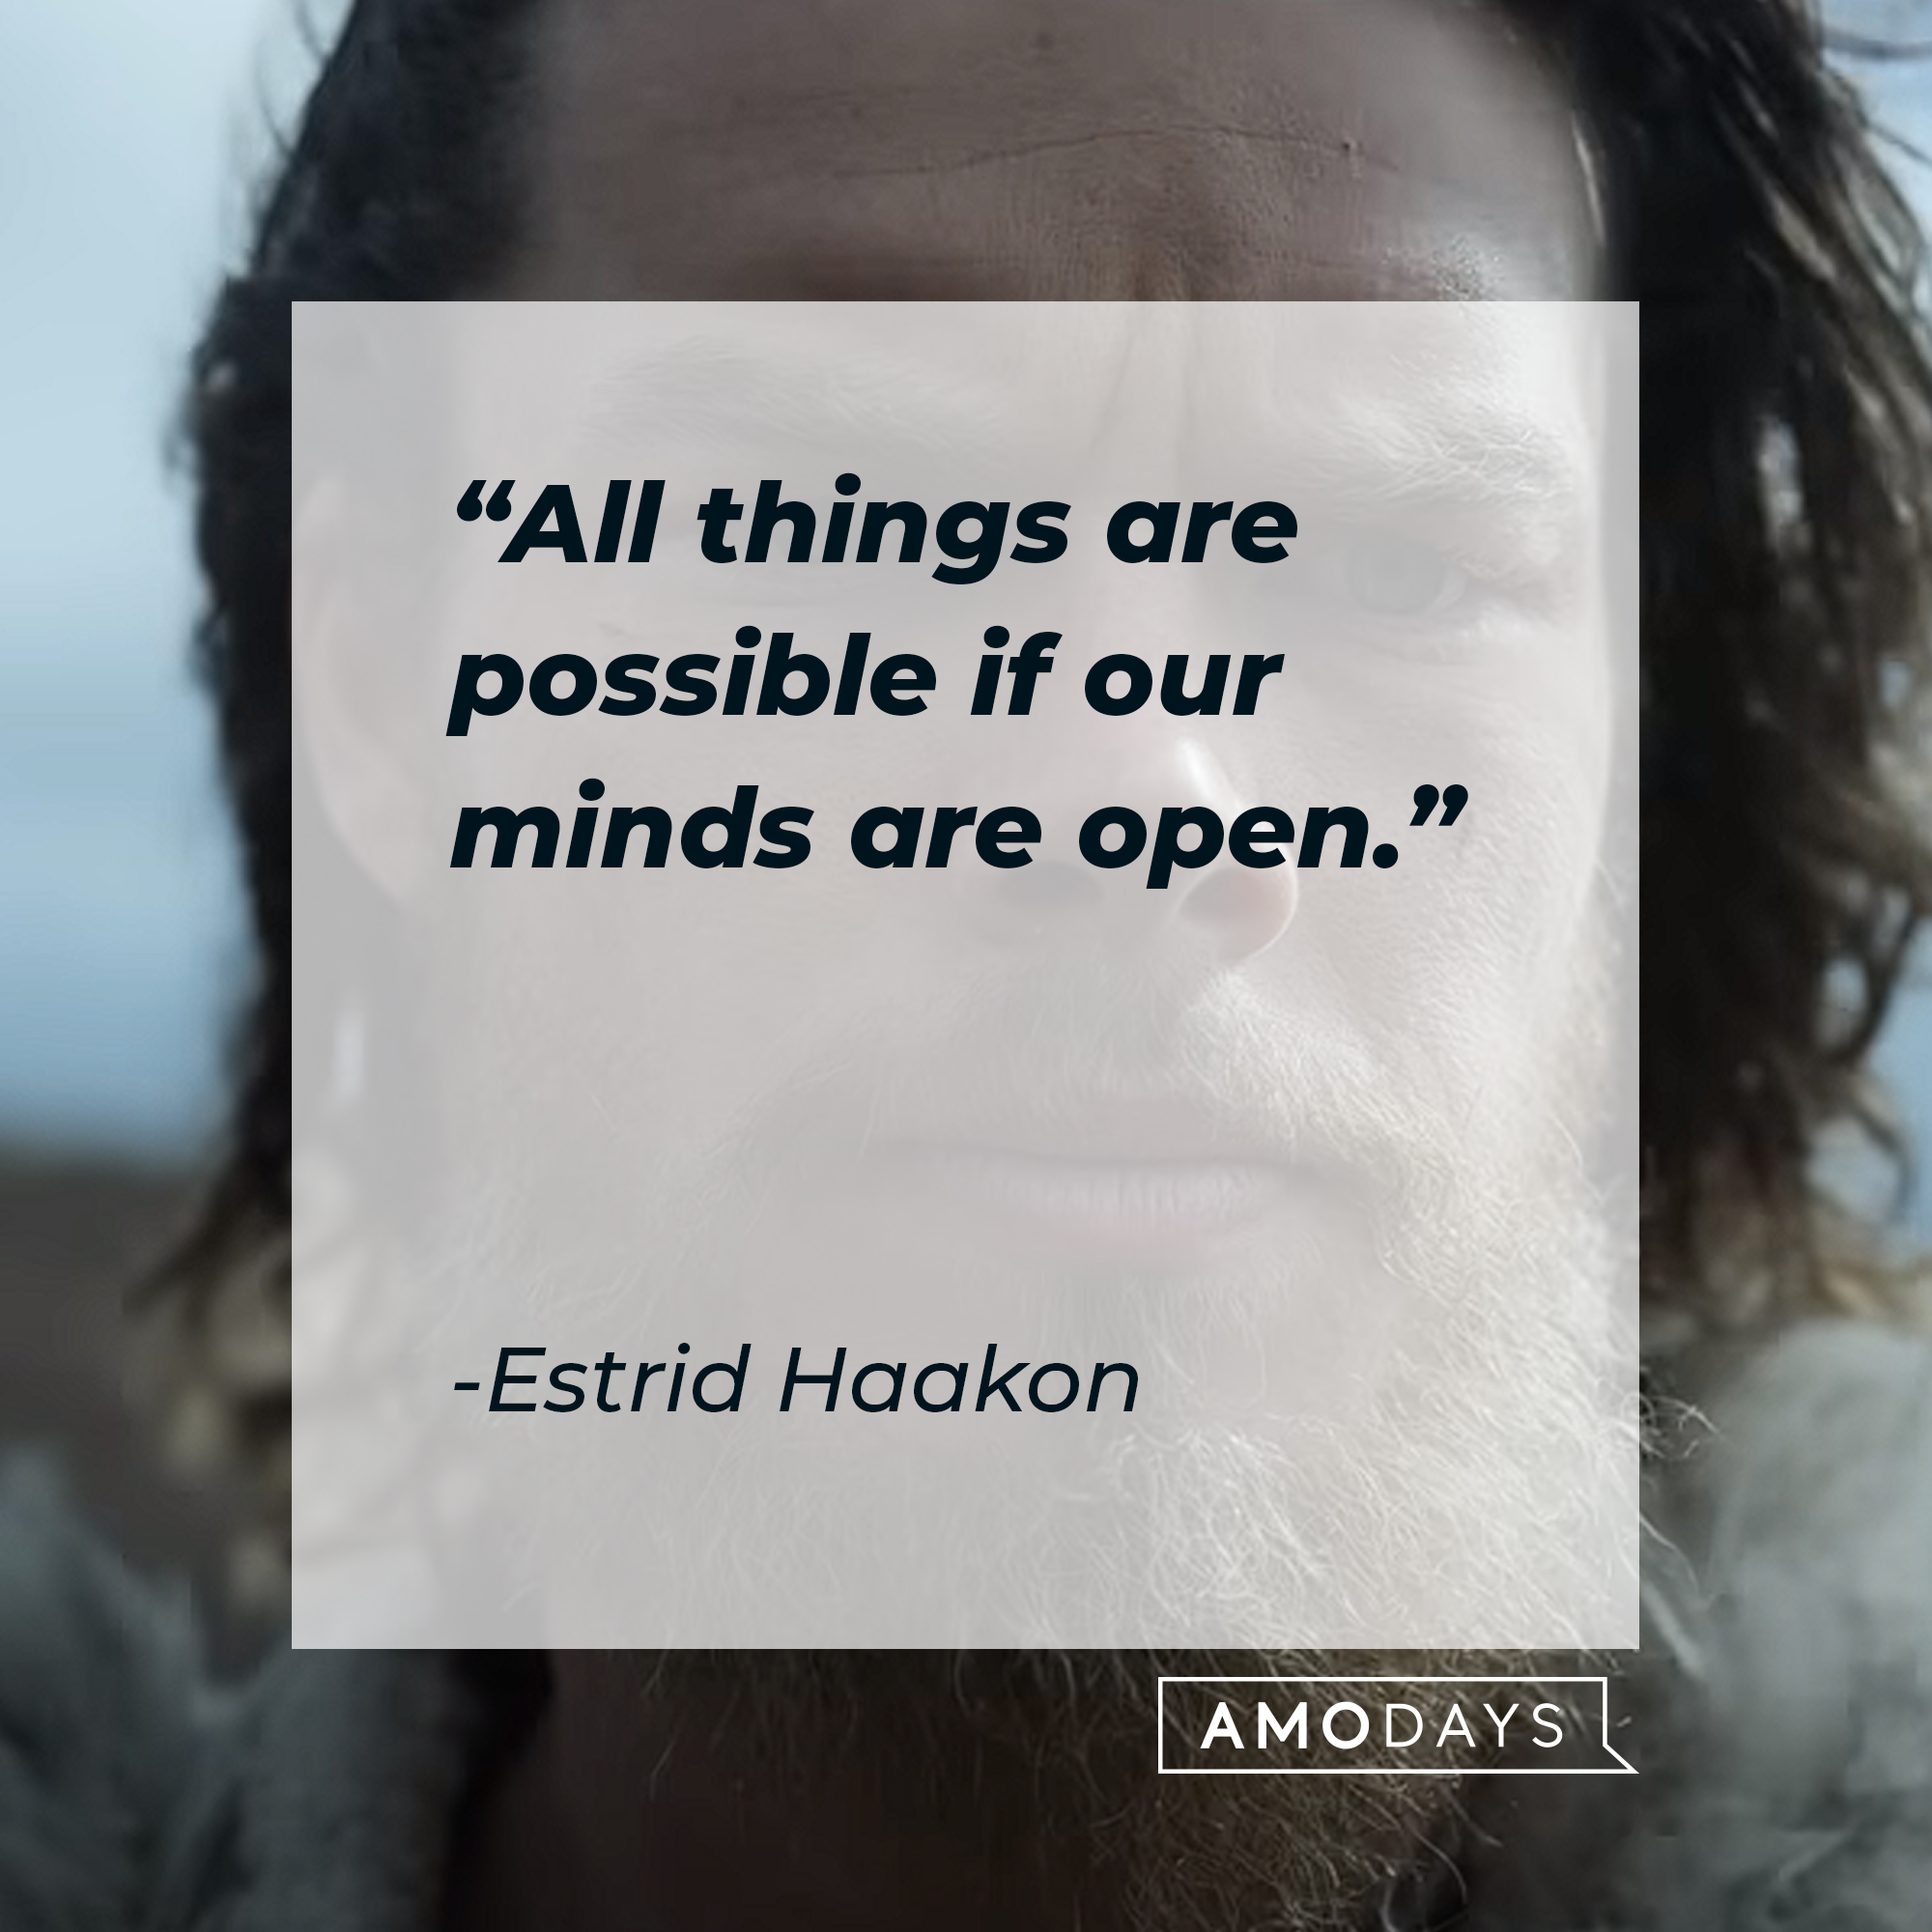 A picture of Harald Sigurdsson with a quote from Estrid Haakon: “All things are possible if our minds are open.” | Source: youtube.com/Netfli